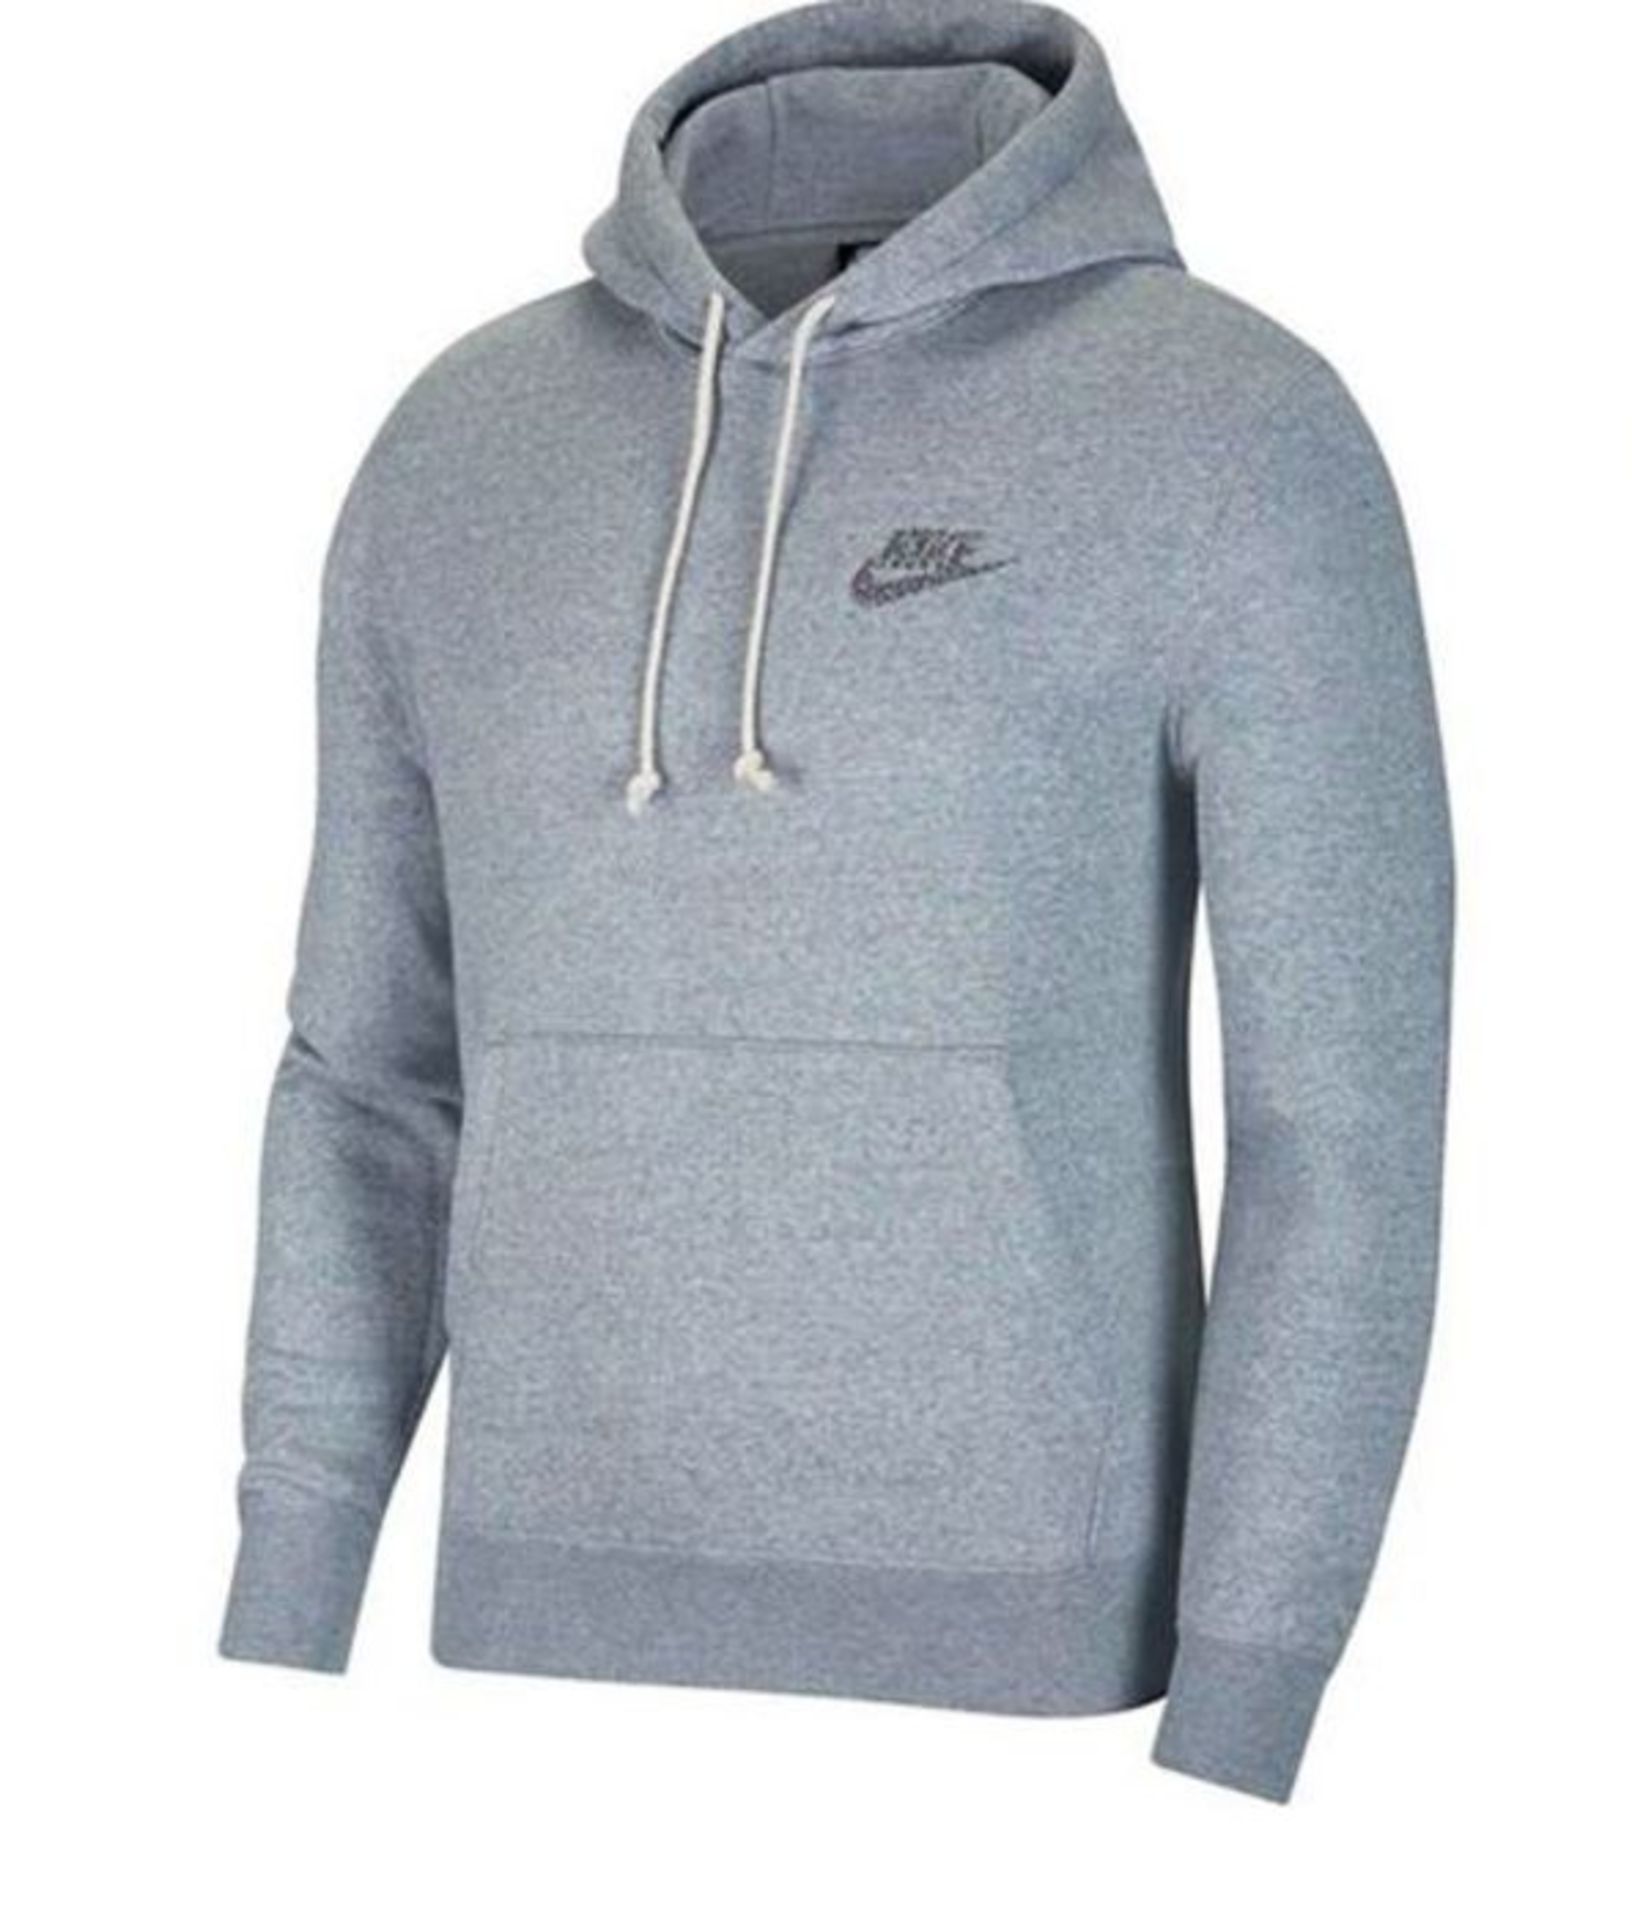 1 X MENS NIKE SPORTSWEAR HOODIE IN M / GREY / RRP £58.00 / AS NEW WITH TAGS